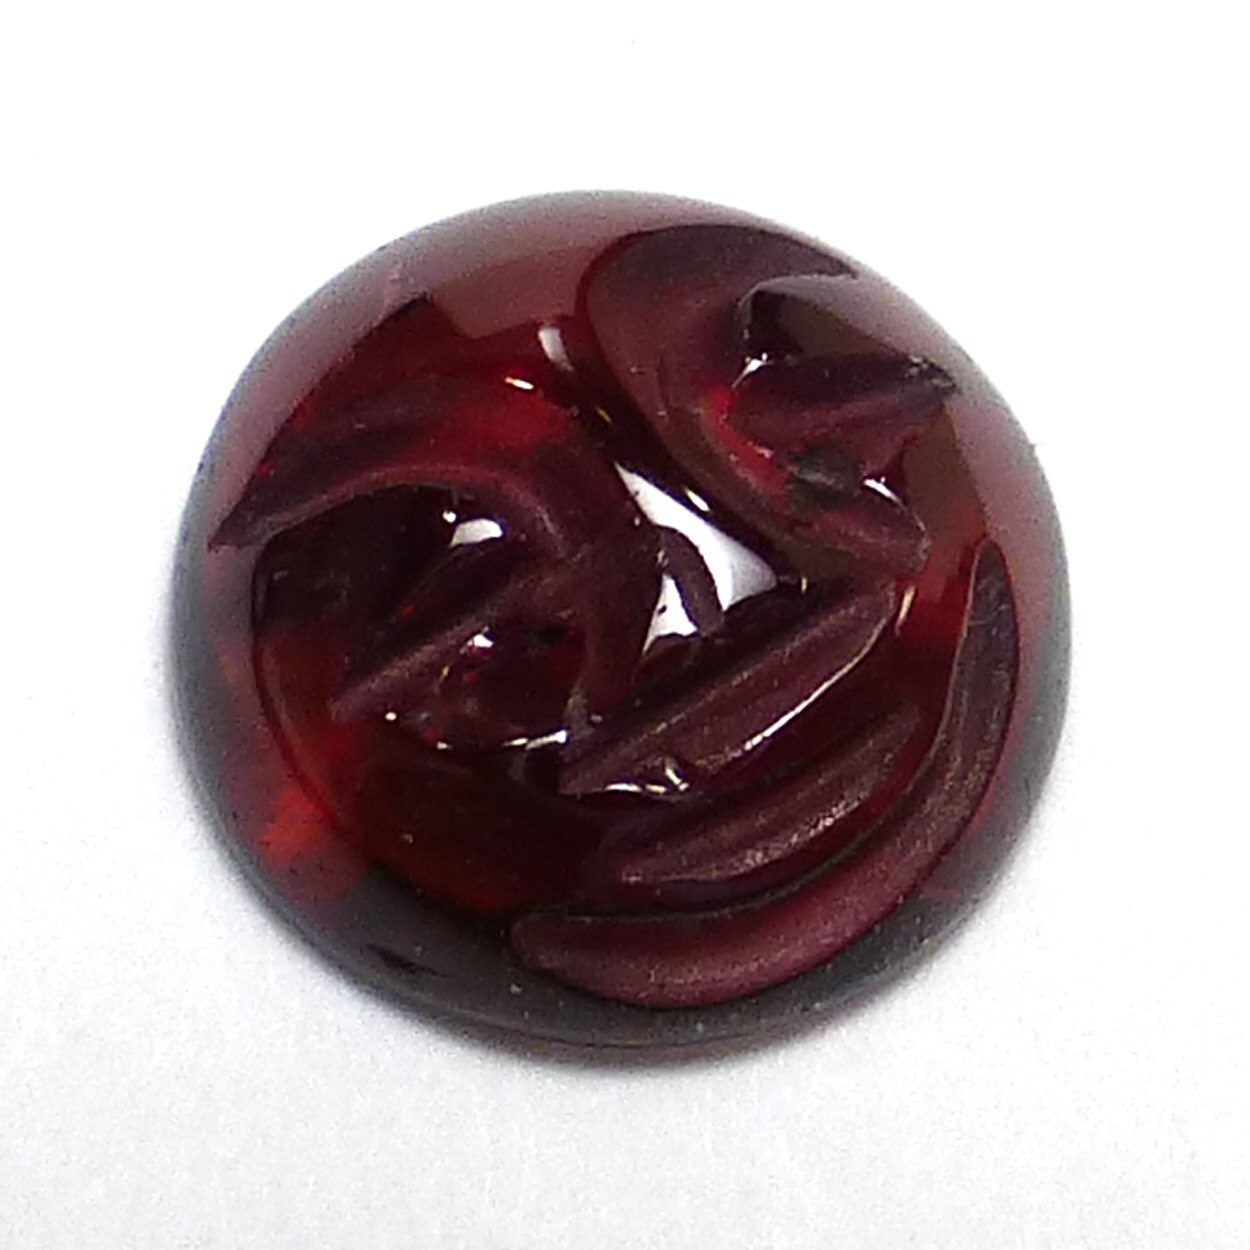 2.73 Carats Garnet Cabochon 9mm Round Carved Face Calibrated Gemstone January Birthstone Deep Burgundy Designer Ring Rings One Stone